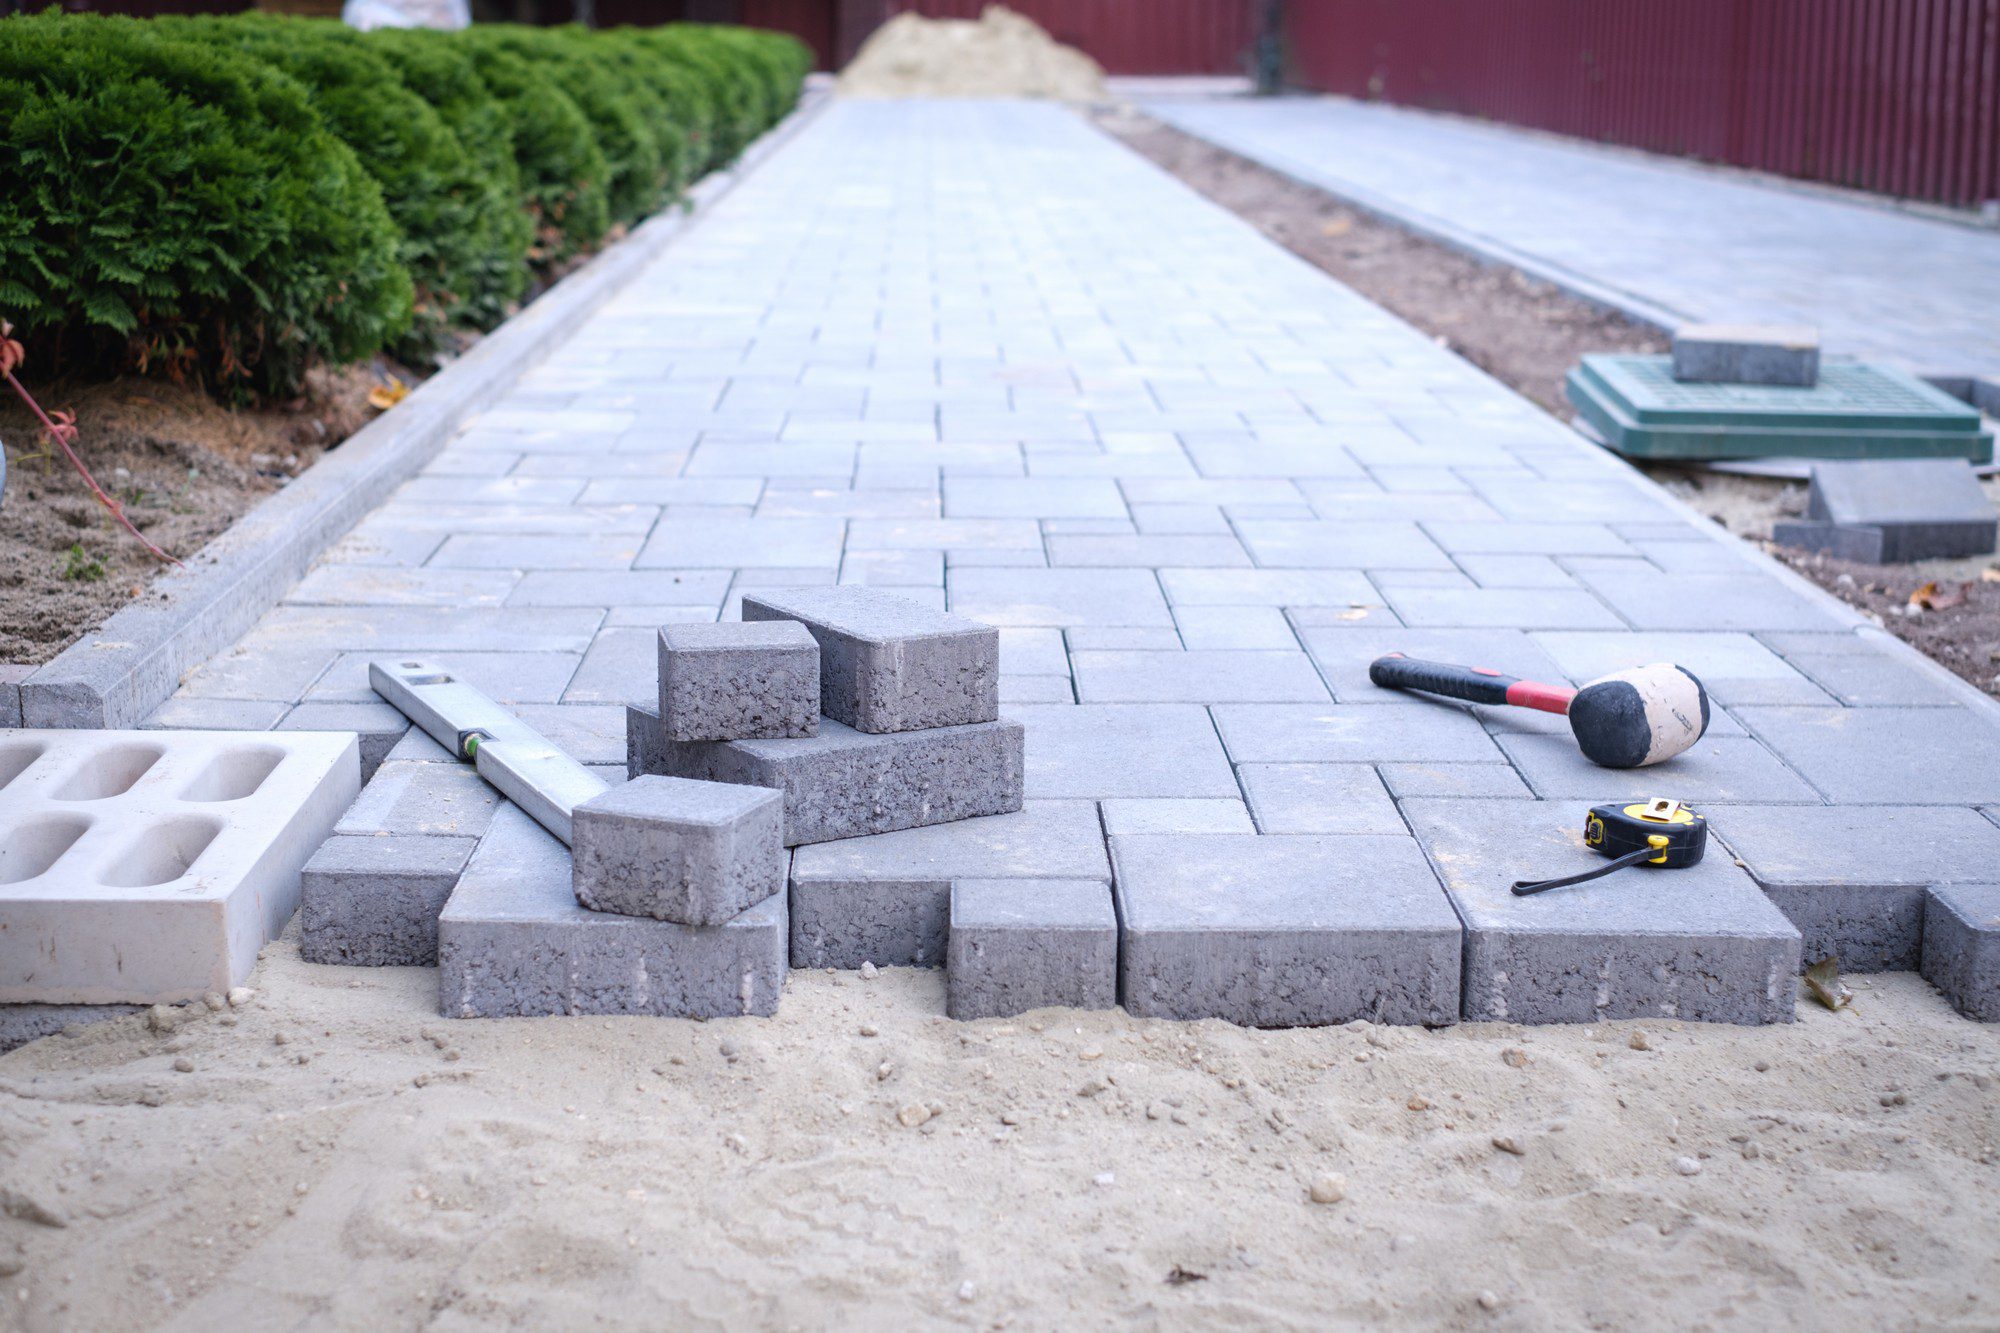 In the image, there is a paved path under construction using interlocking concrete pavers. The path has not been fully completed, as some pavers are stacked to the side, and the sand base is visible at the edges and on which the pavers are laid. Construction tools are also visible, including a rubber mallet, a measuring tape, and what appears to be a long spirit level. In the background, we can see a neatly trimmed hedge alongside the path and a fence on the far side. It looks like landscaping work is in progress. There's also a pile of sand or similar material in the distance, likely used for the bedding of the pavers.